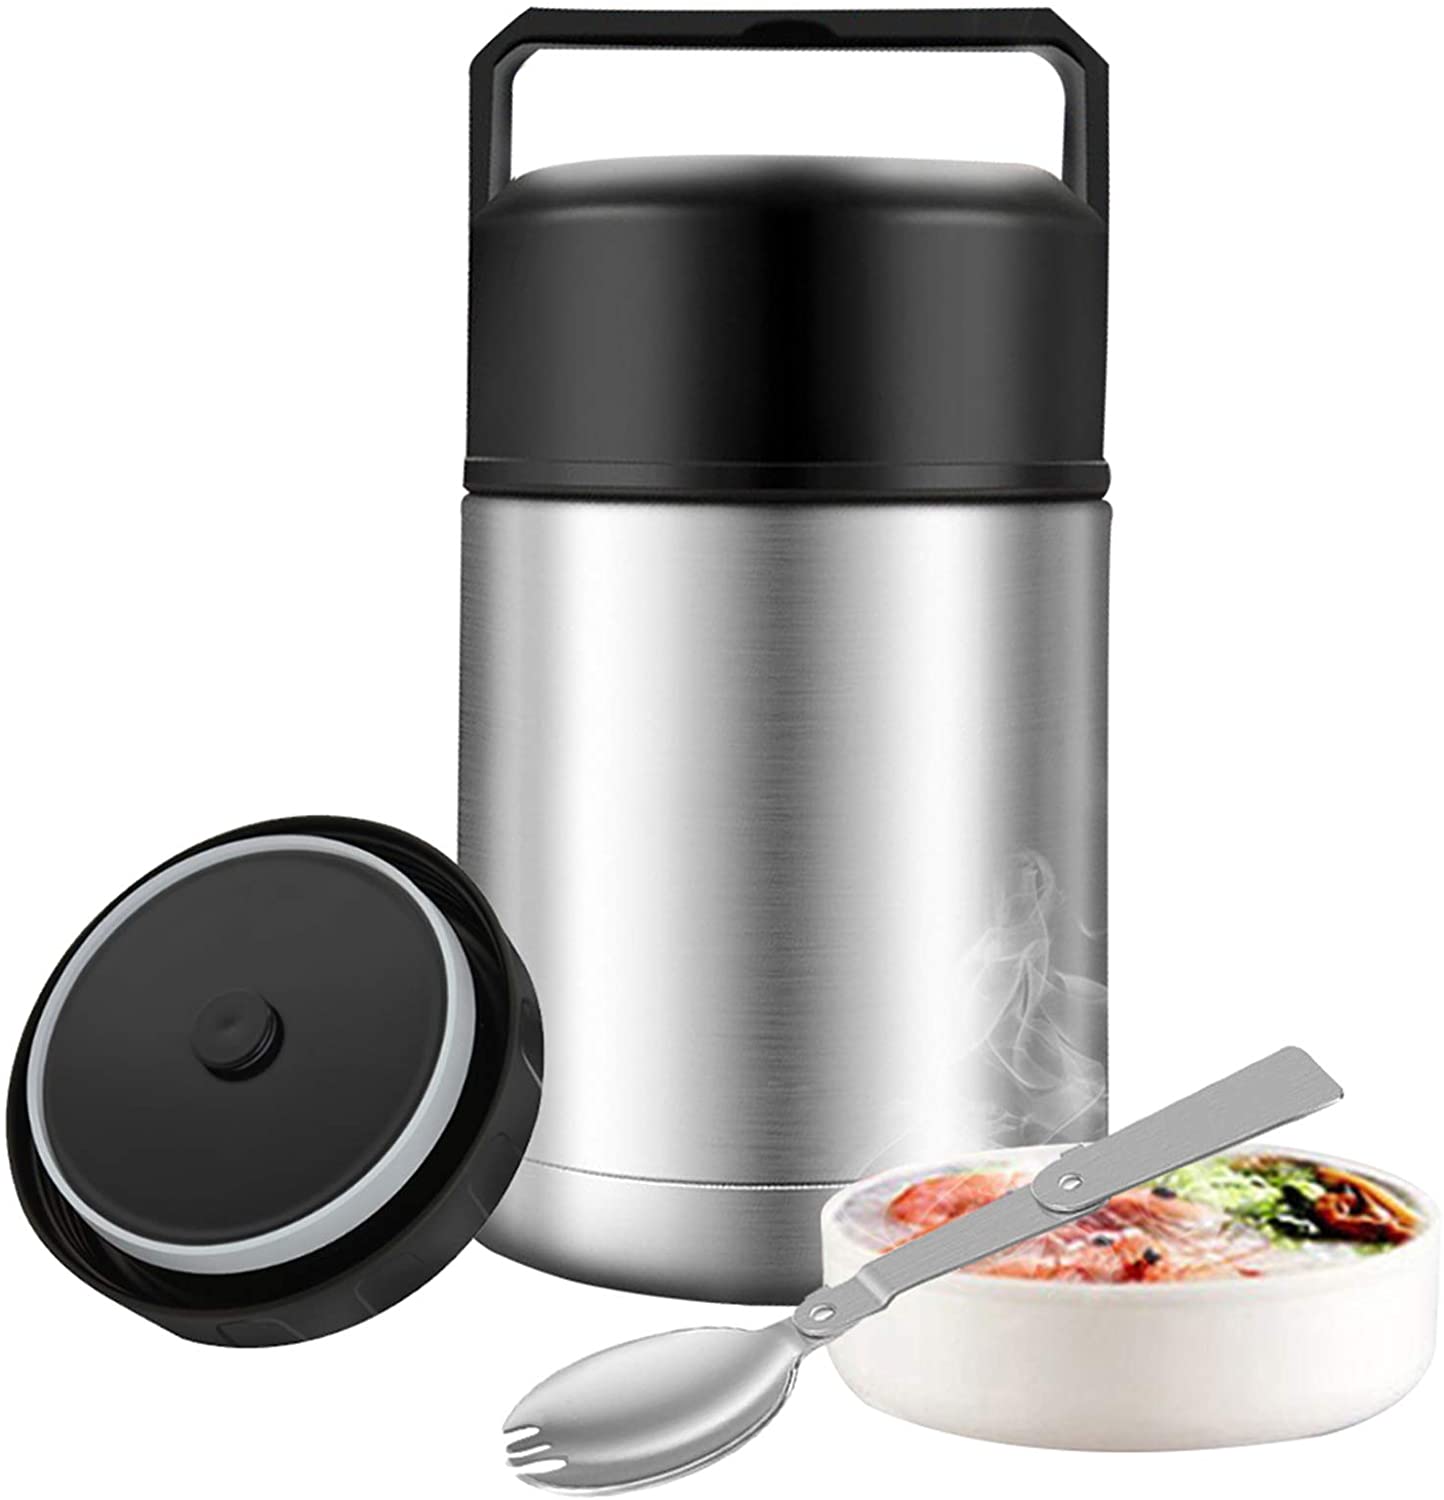 https://www.dontwasteyourmoney.com/wp-content/uploads/2021/07/ssawcasa-stainless-steel-soup-thermos-soup-thermos.jpg